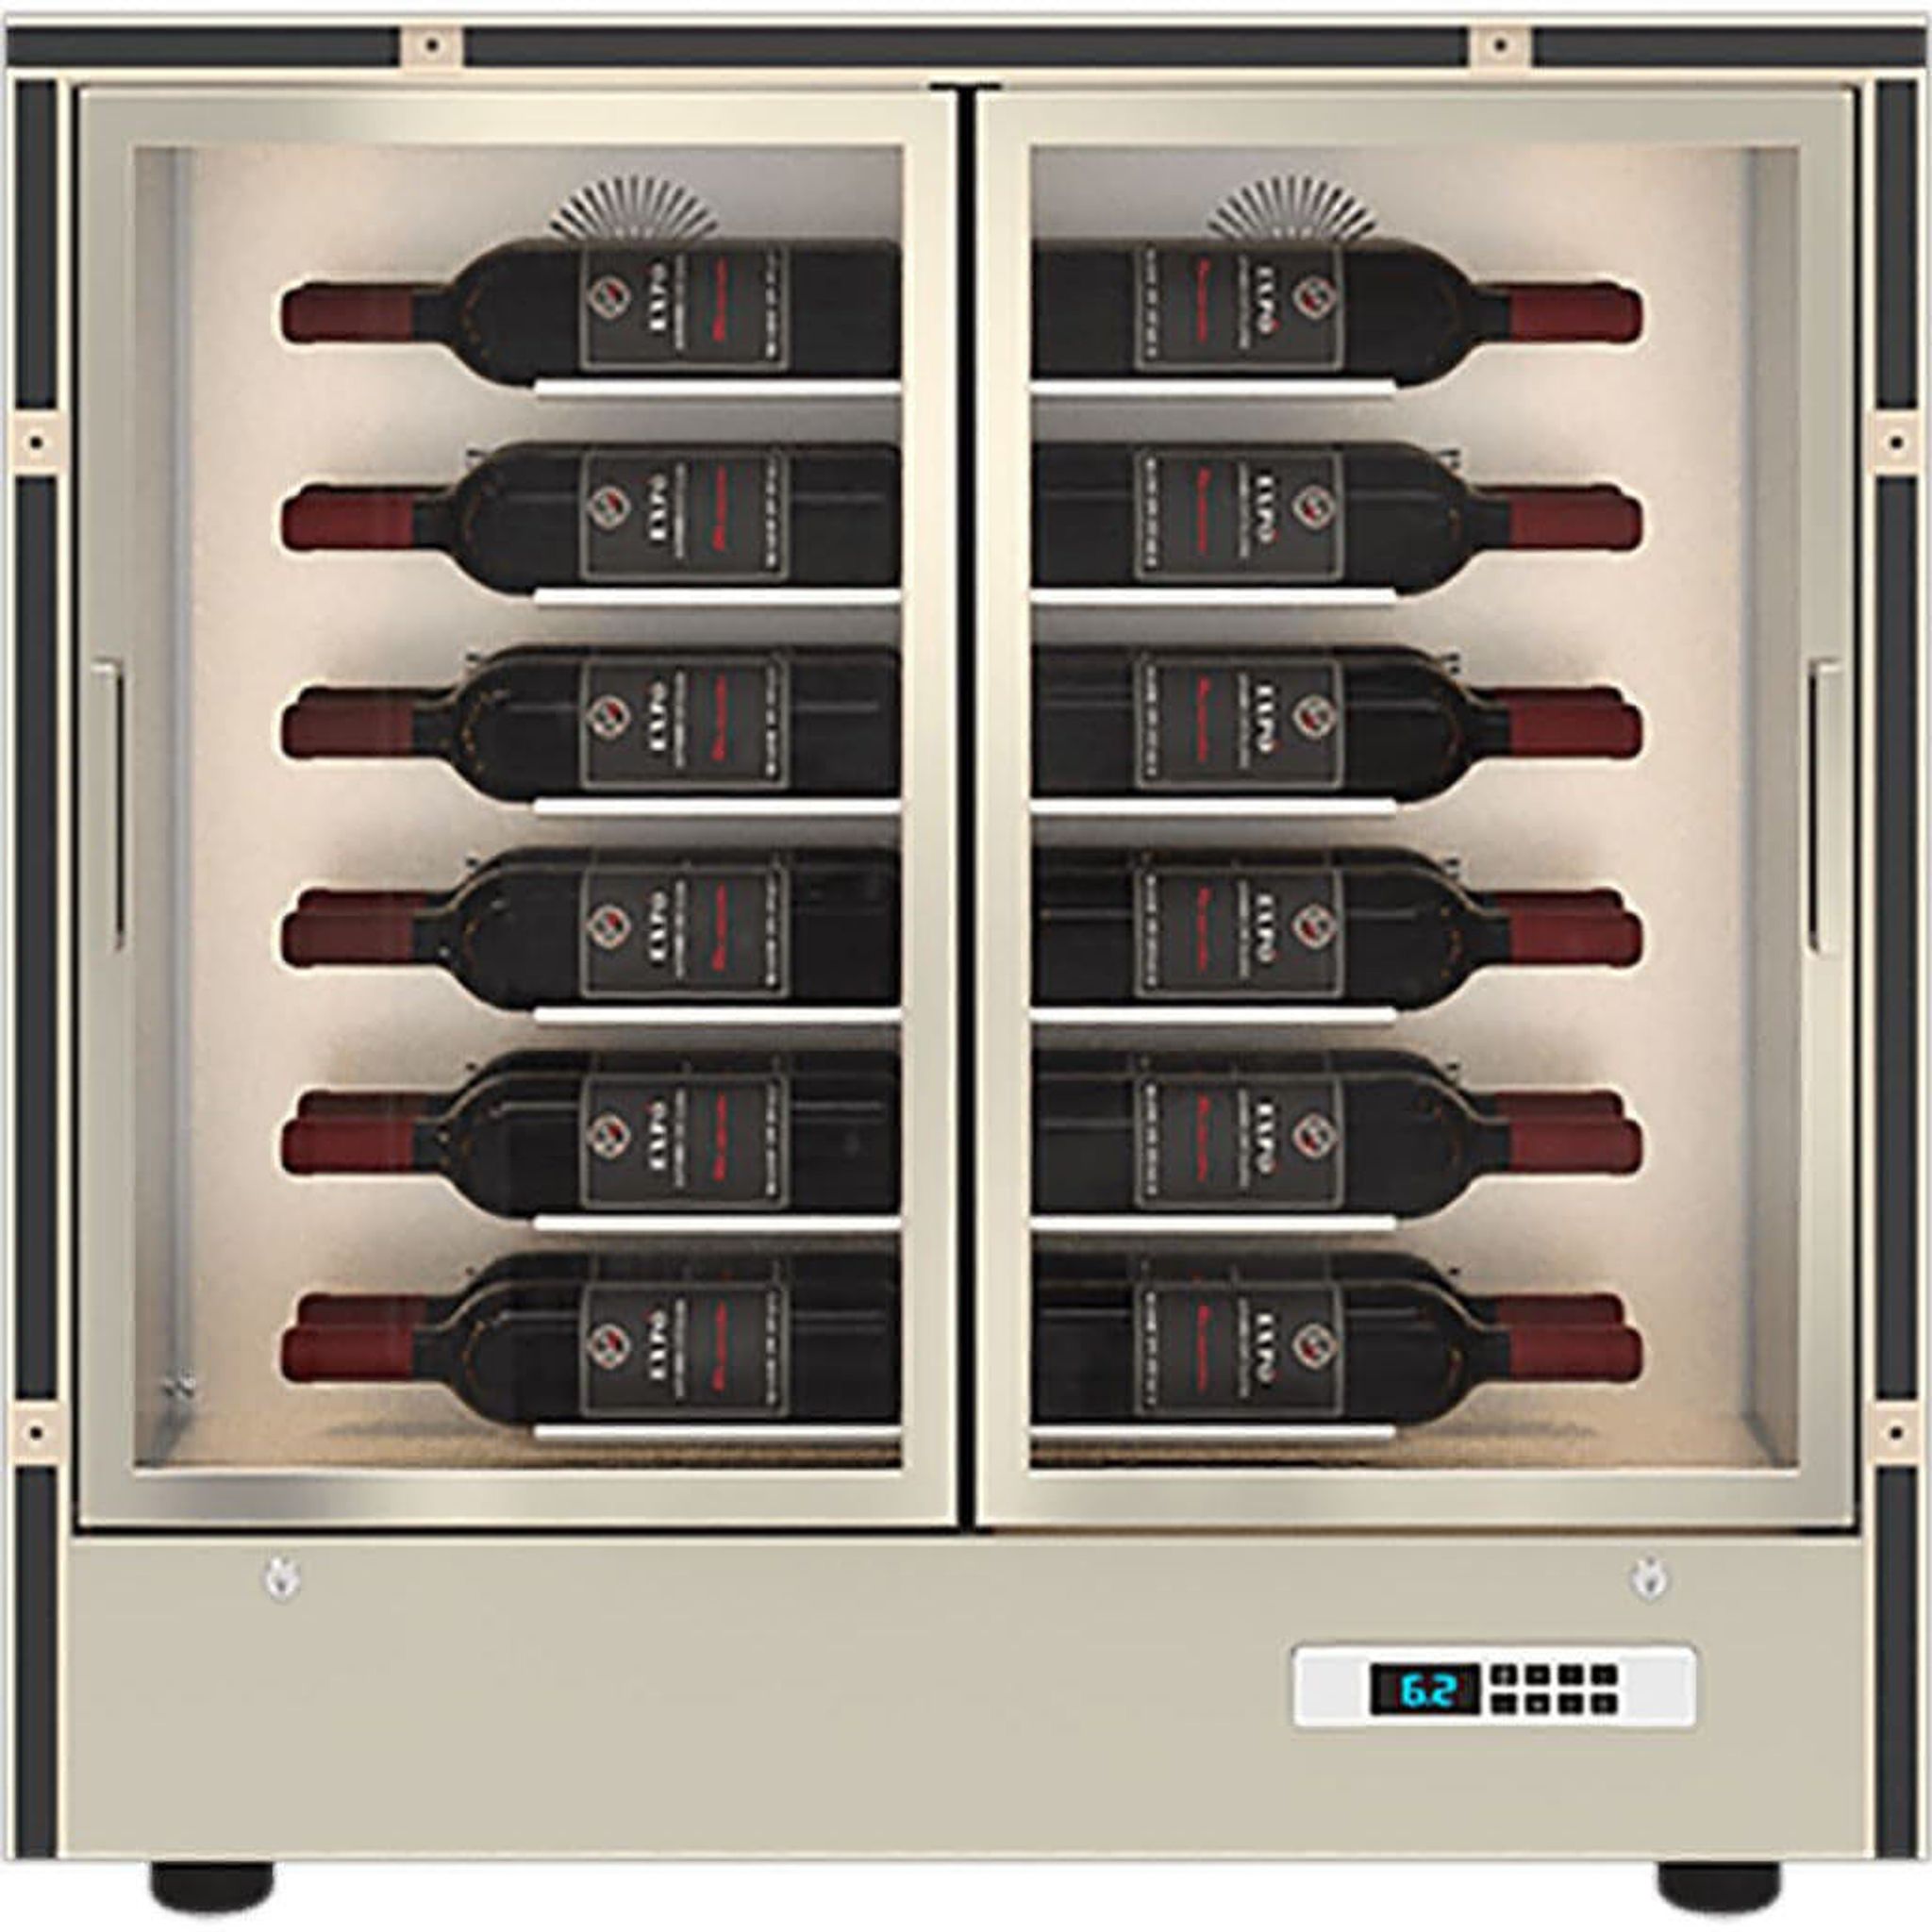 Mod 20 - Built in / Freestanding Wine Wall MD-20 - For Home Use